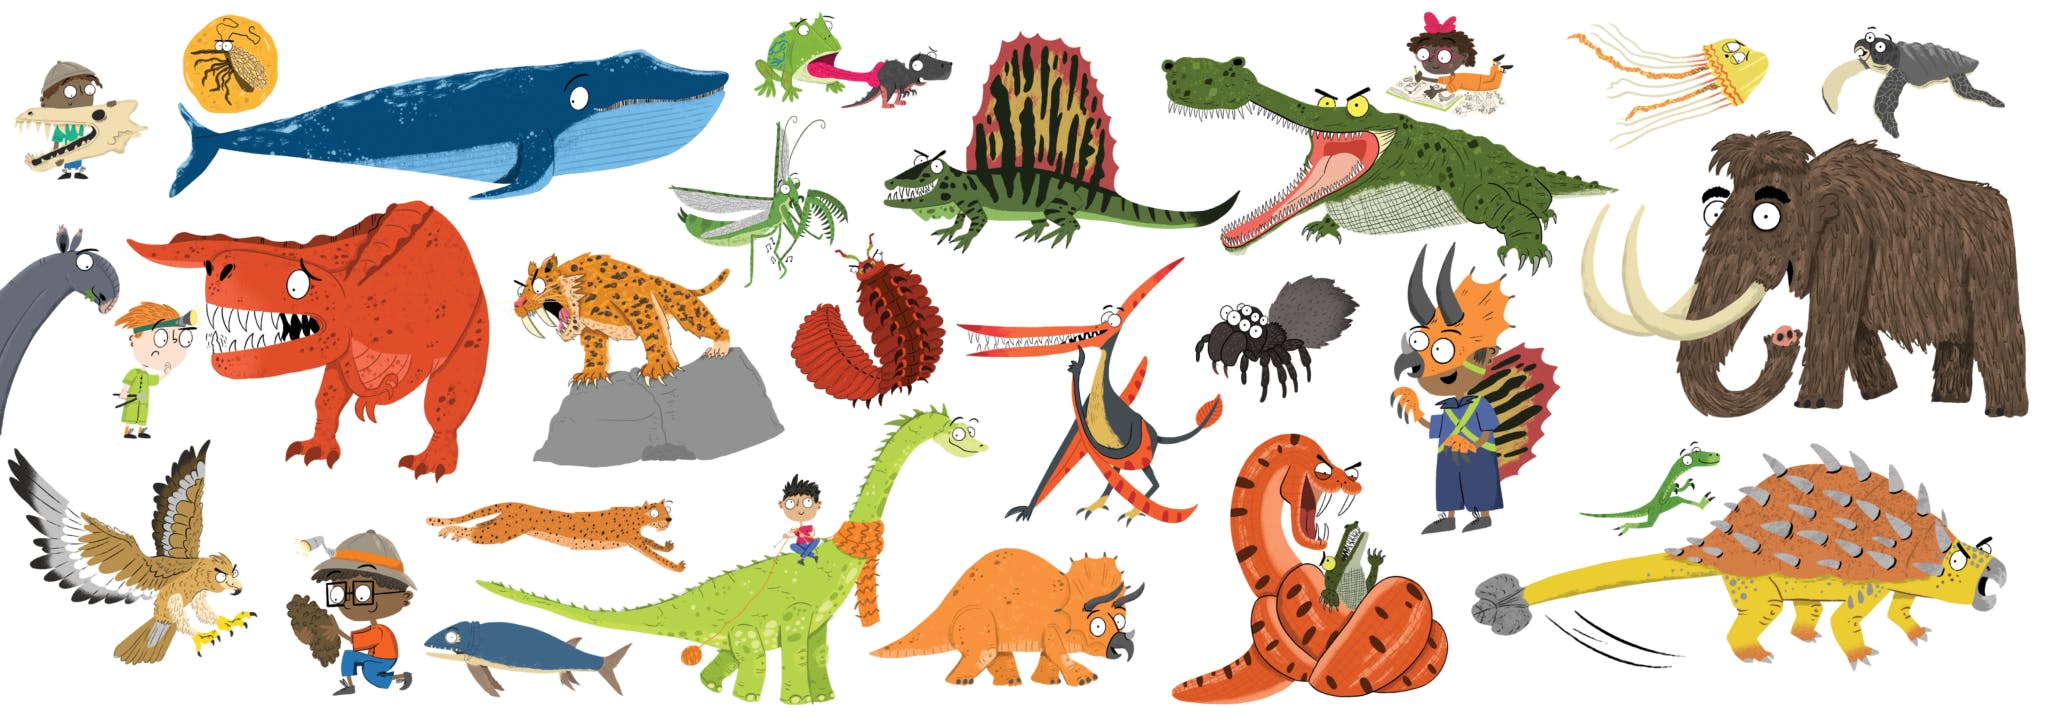 Lots of illustrated reptiles and dinosaurs on a white background